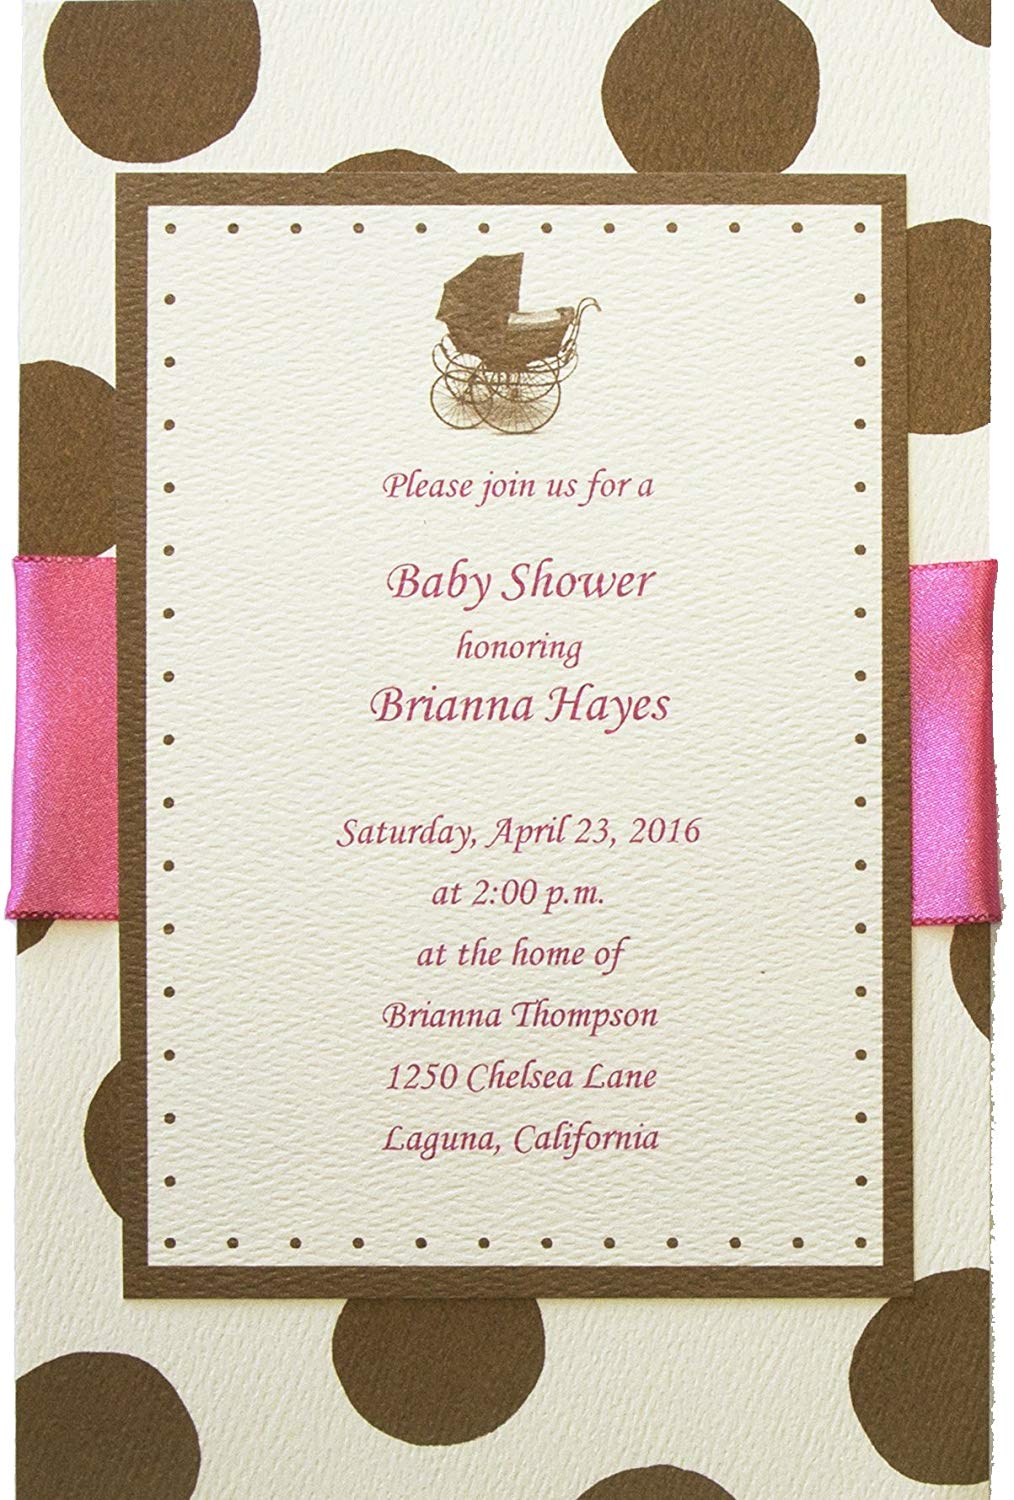 Full Size of Baby Shower:63+ Delightful Cheap Baby Shower Invitations Image Inspirations Amazoncom Baby Shower Invitations Baby Shower Invitations Amazoncom Baby Shower Invitations Baby Shower Invitations Boy Or Twins Baby Shower Invitations Printable Diy Baby Shower Invitations 10 In